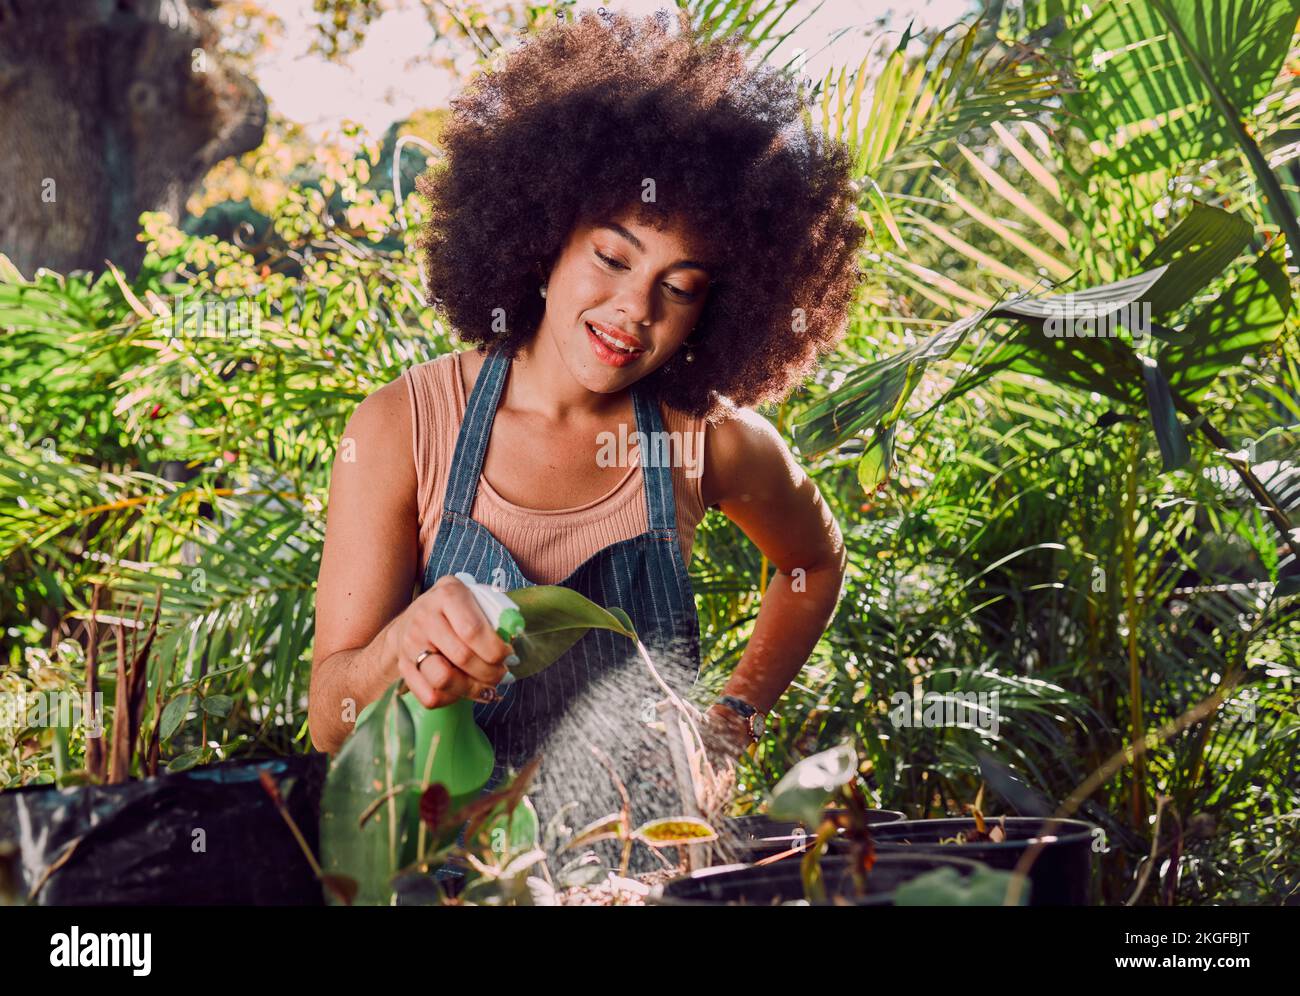 Black woman, water and spray bottle for plants, garden and eco friendly outdoor flowers. Agriculture, sustainability or African American female Stock Photo